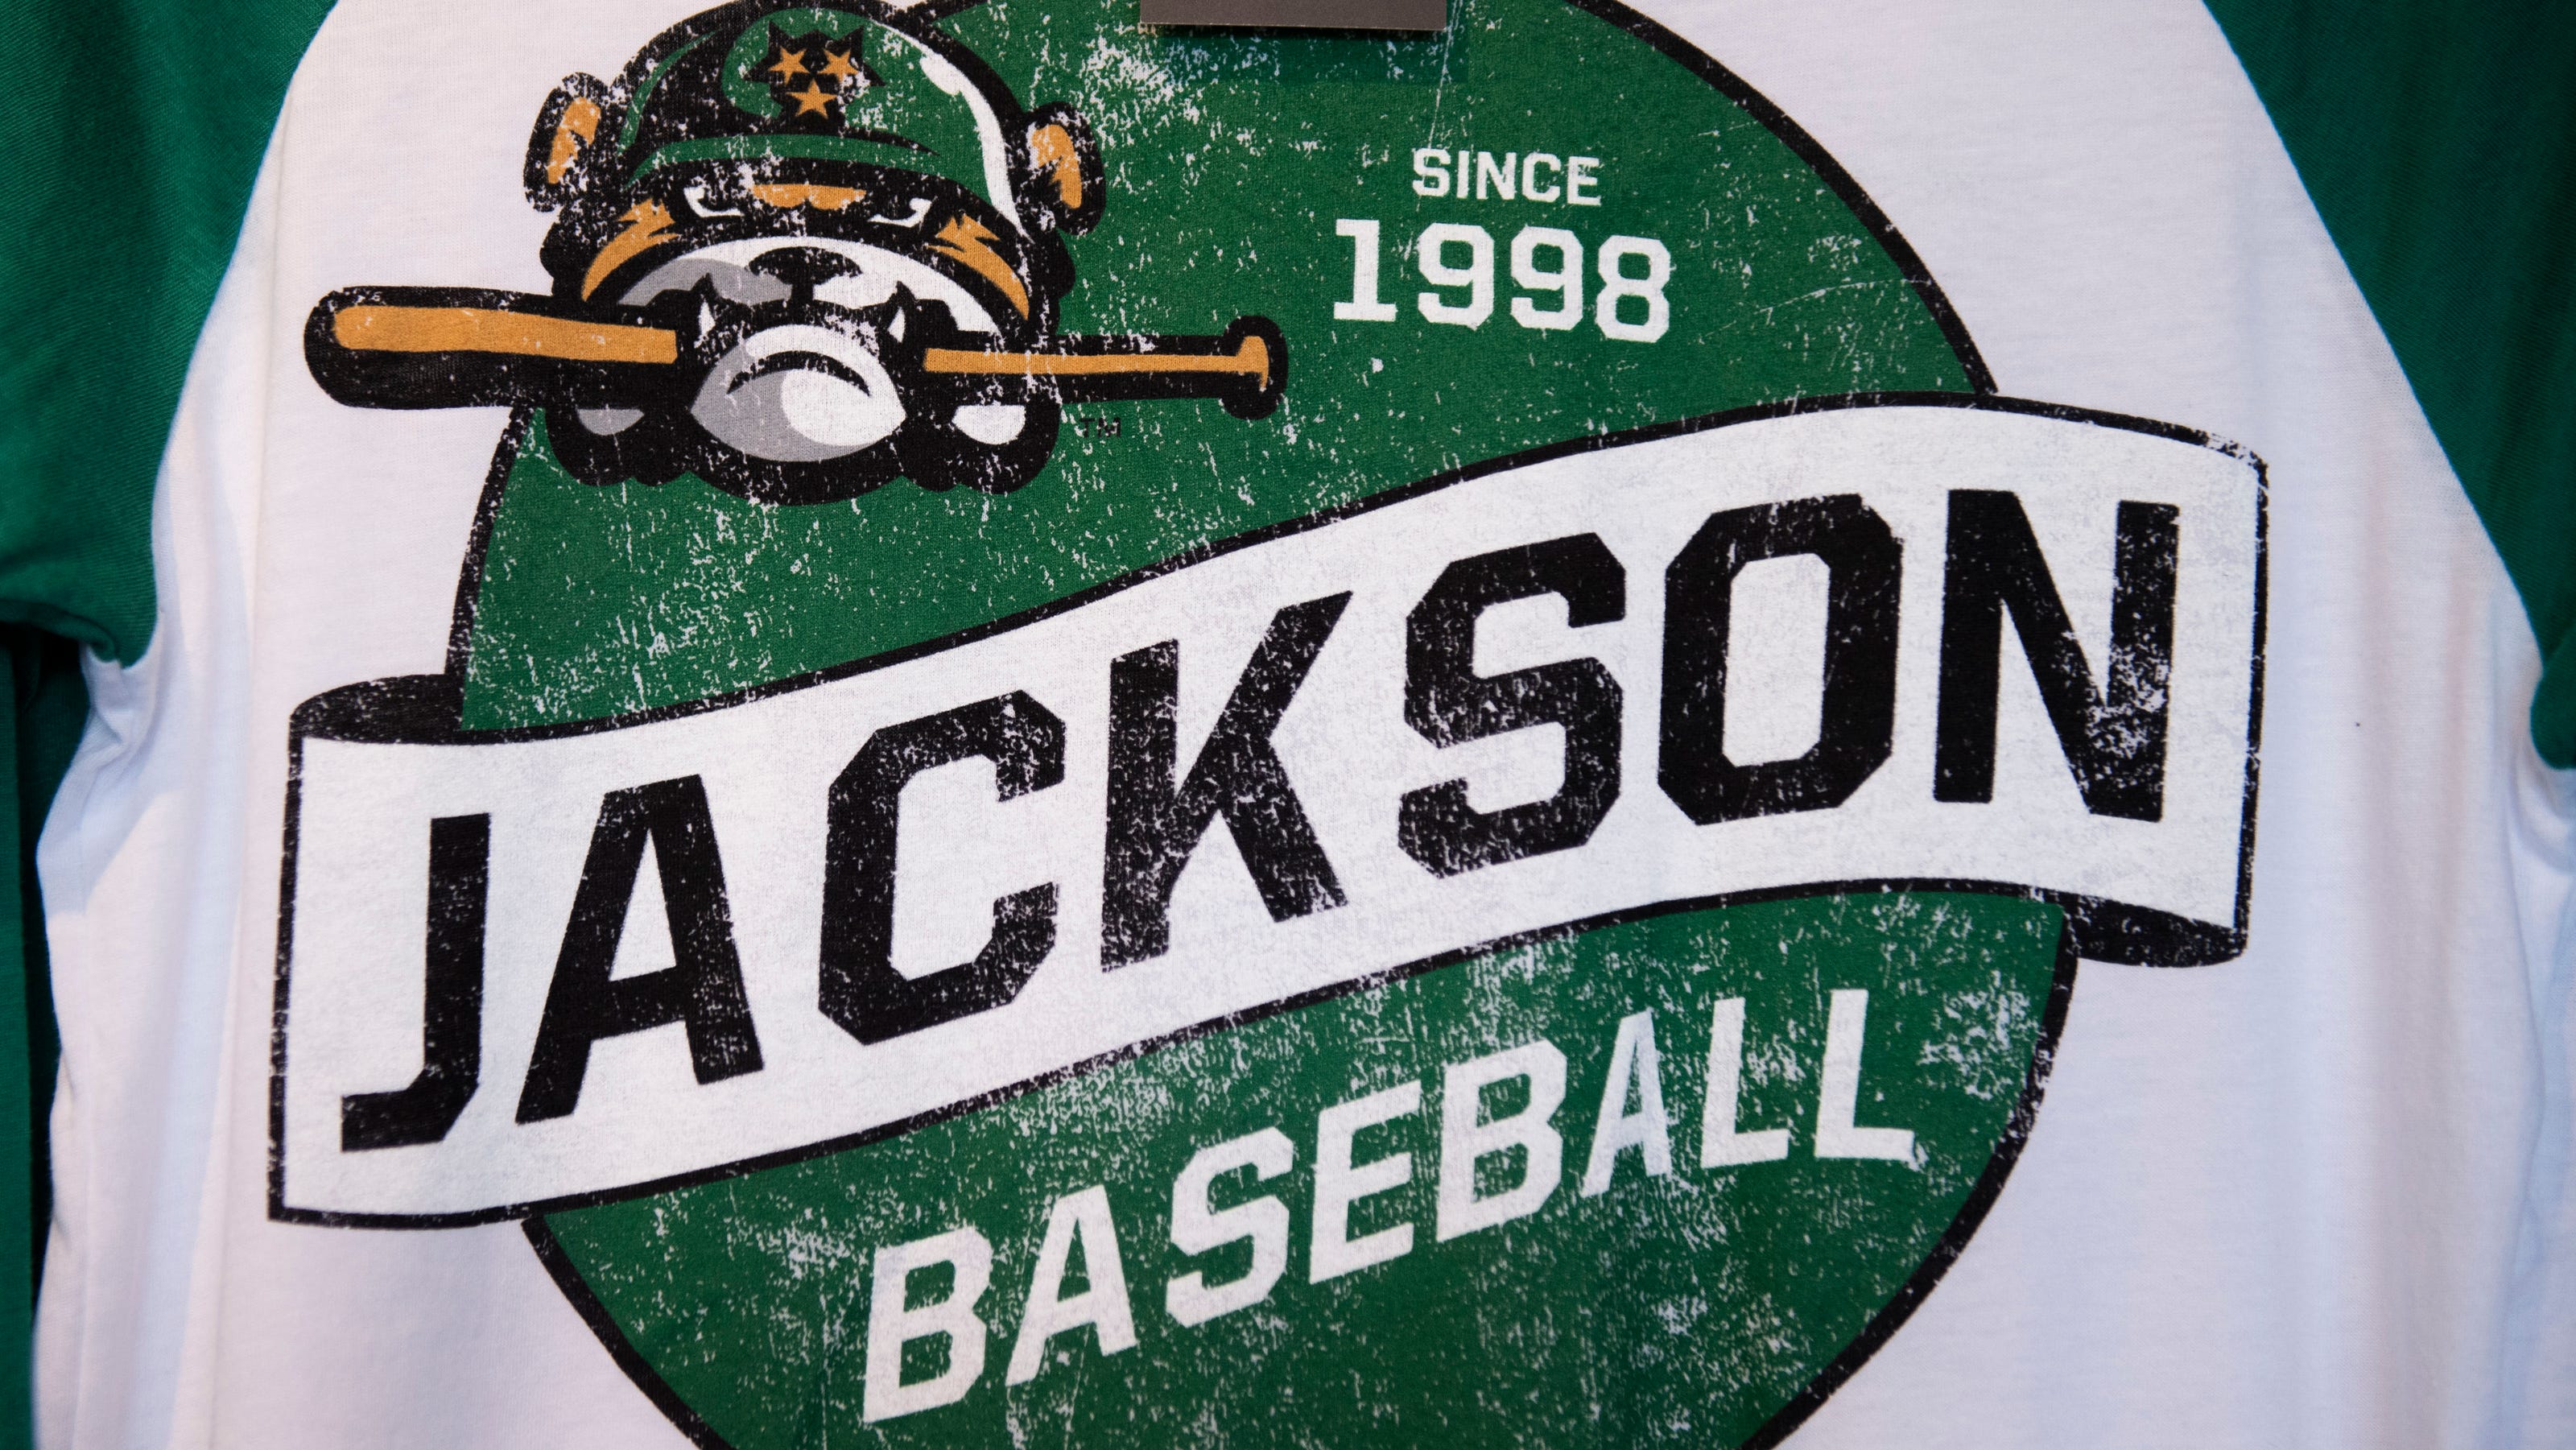 Jackson Generals weren't invited to join the new minor league baseball